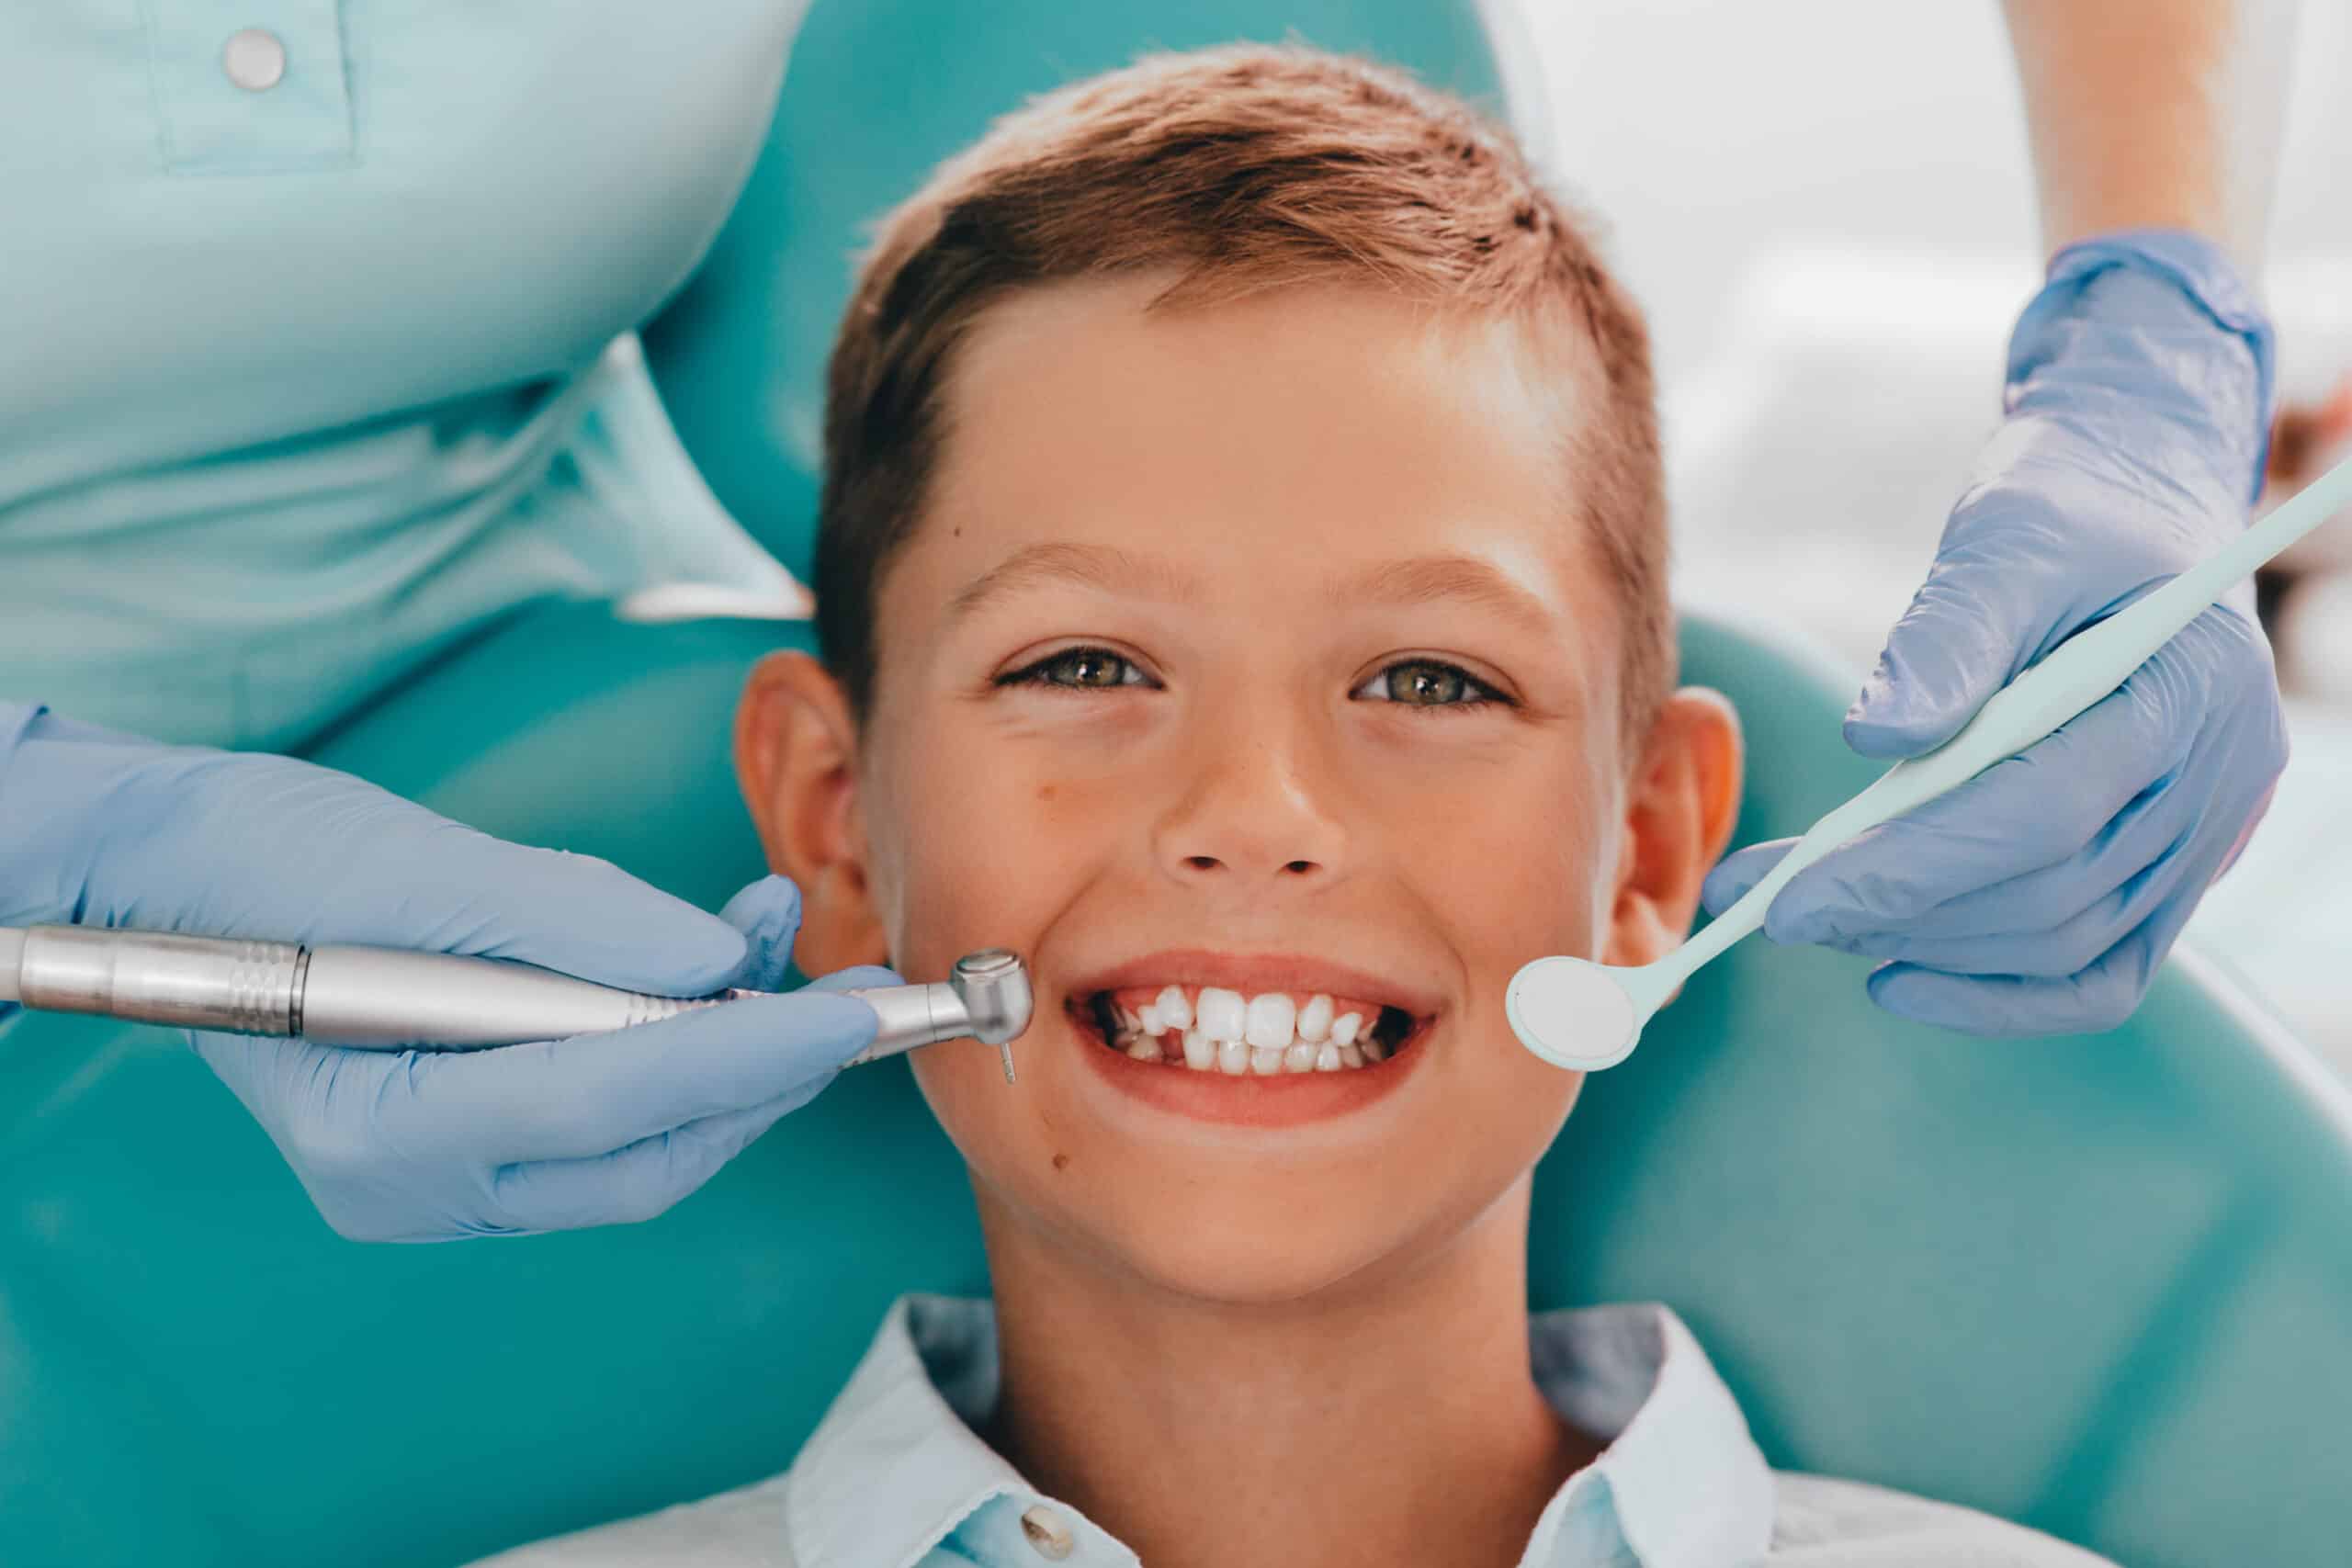 Ensuring Quality Care With Special Needs Pediatric Dentistry Special Needs Pediatric Dentistry in Rigby. RPD. Fillings, mouthguards, preventative and emergency dentist in Rigby, ID 83442 Ph:208-745-2010 Pediatric Dentistry home rigby pediatric dental dentist in rigby ID